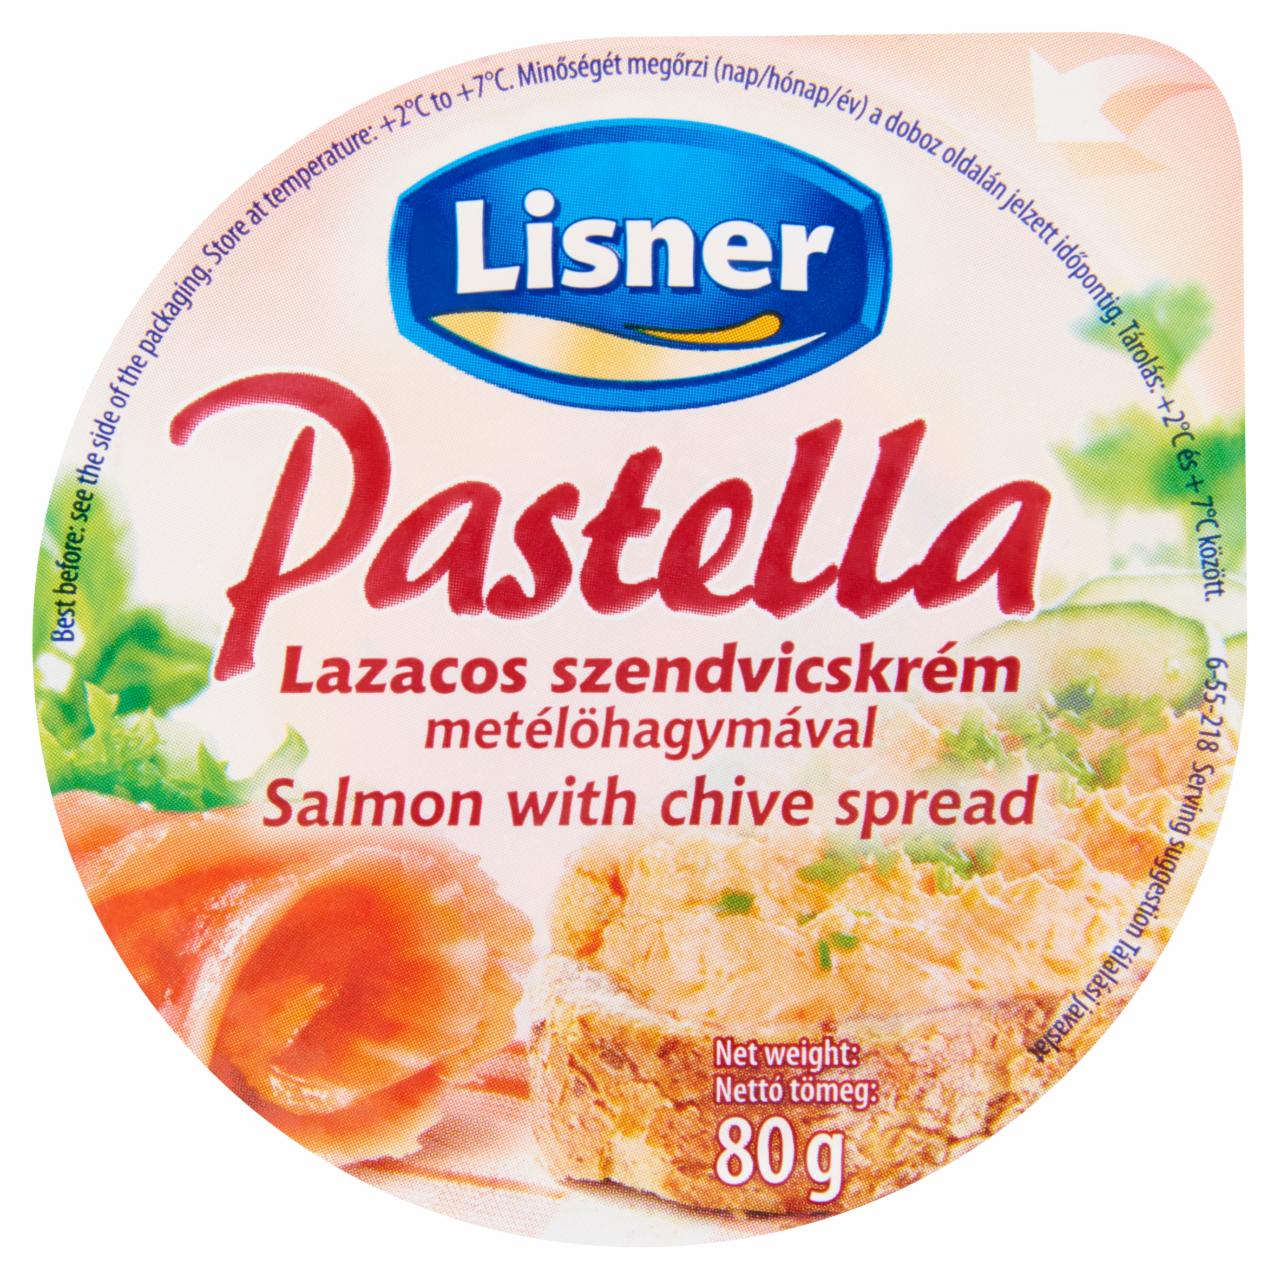 Photo - Lisner Pastella Salmon with Chive Spread 80 g